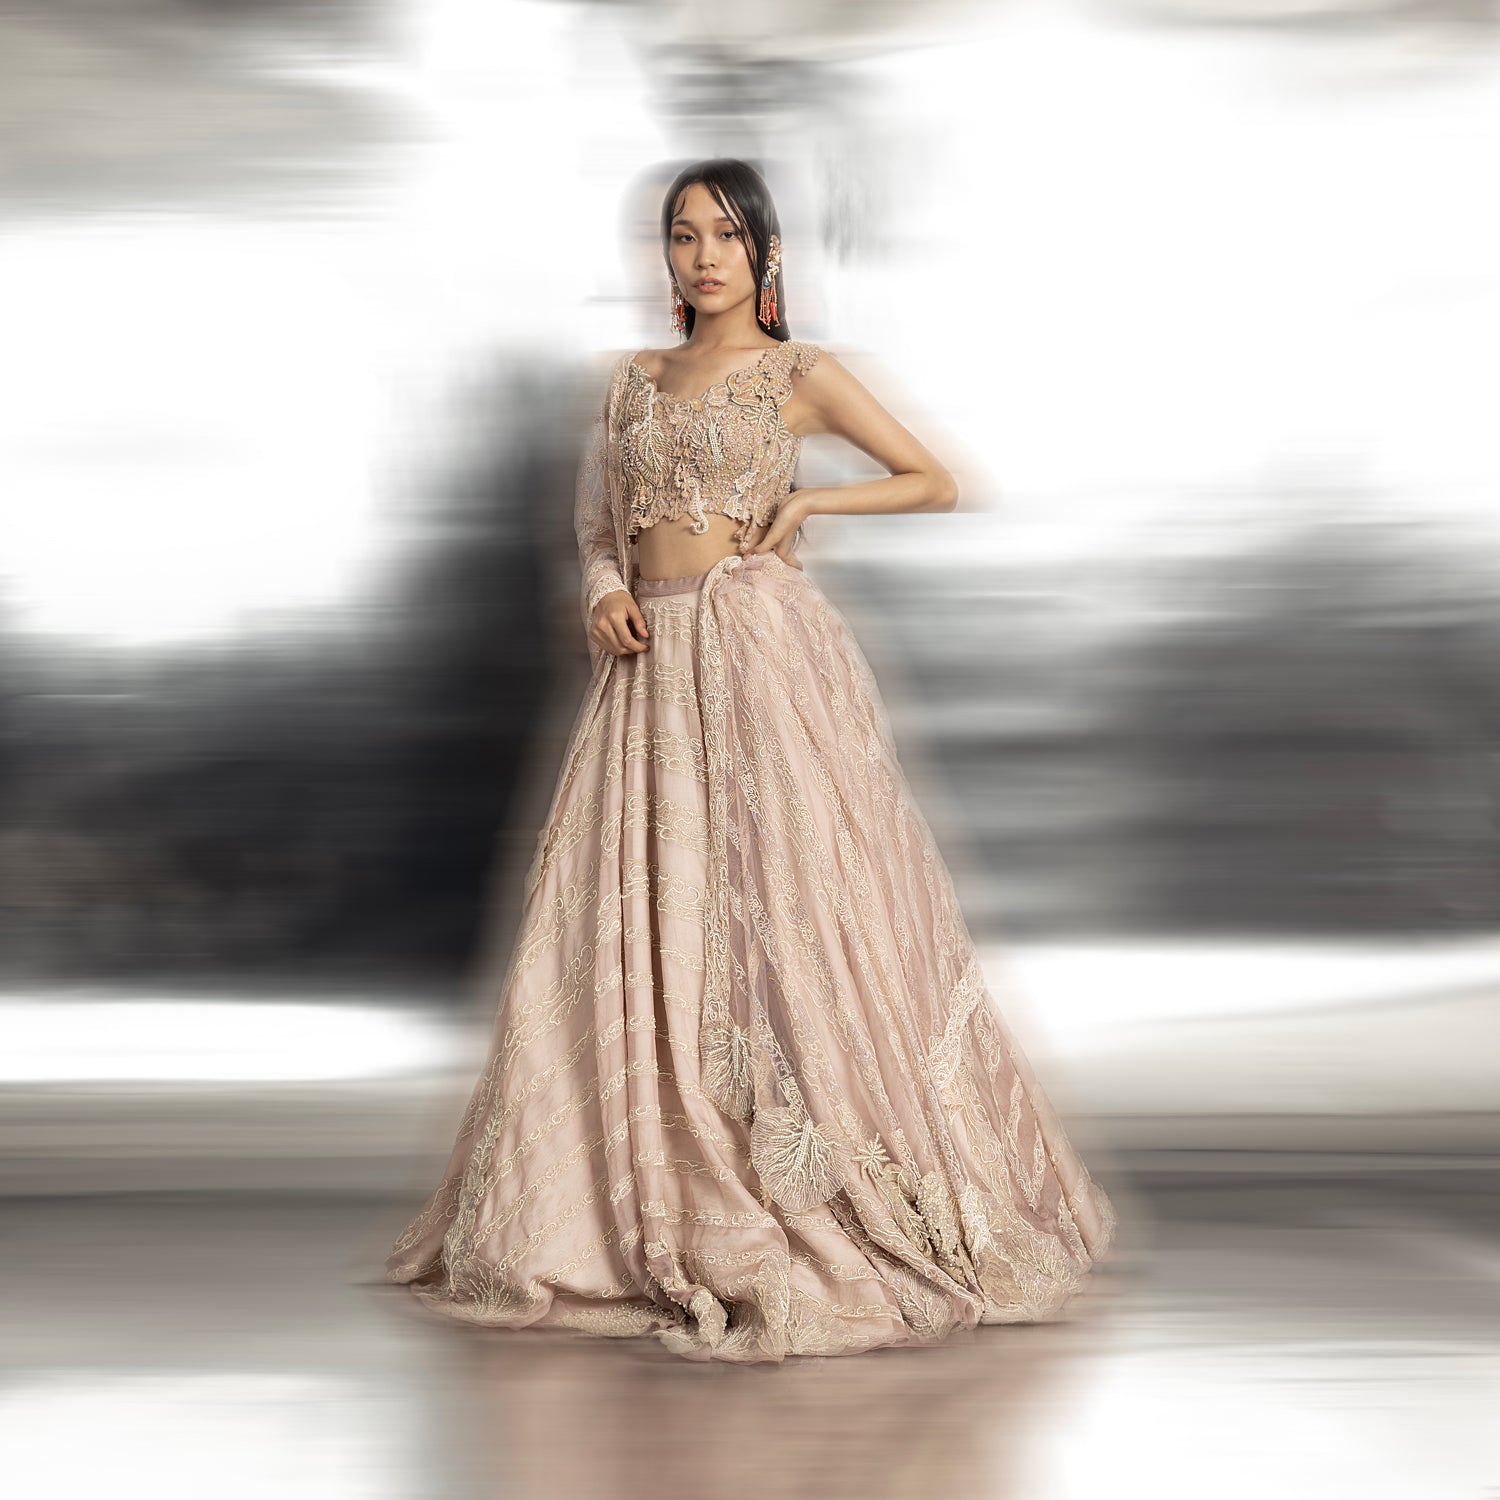 Silk Organza Lehenga with a fine play of geometric lines and reef Motifs with 3D Embroidery detailing on the Blouse. There is a fine play of Resham, Sequin, Pearl, and Katdana detailing. The look has playful young vibes that are perfect for someone who loves new and different visions of design.  #abhisheksharma #fashiondesignerabhisheksharma #reef #redcarpet #shortdress #abhishekstudio #lfw #fdci 